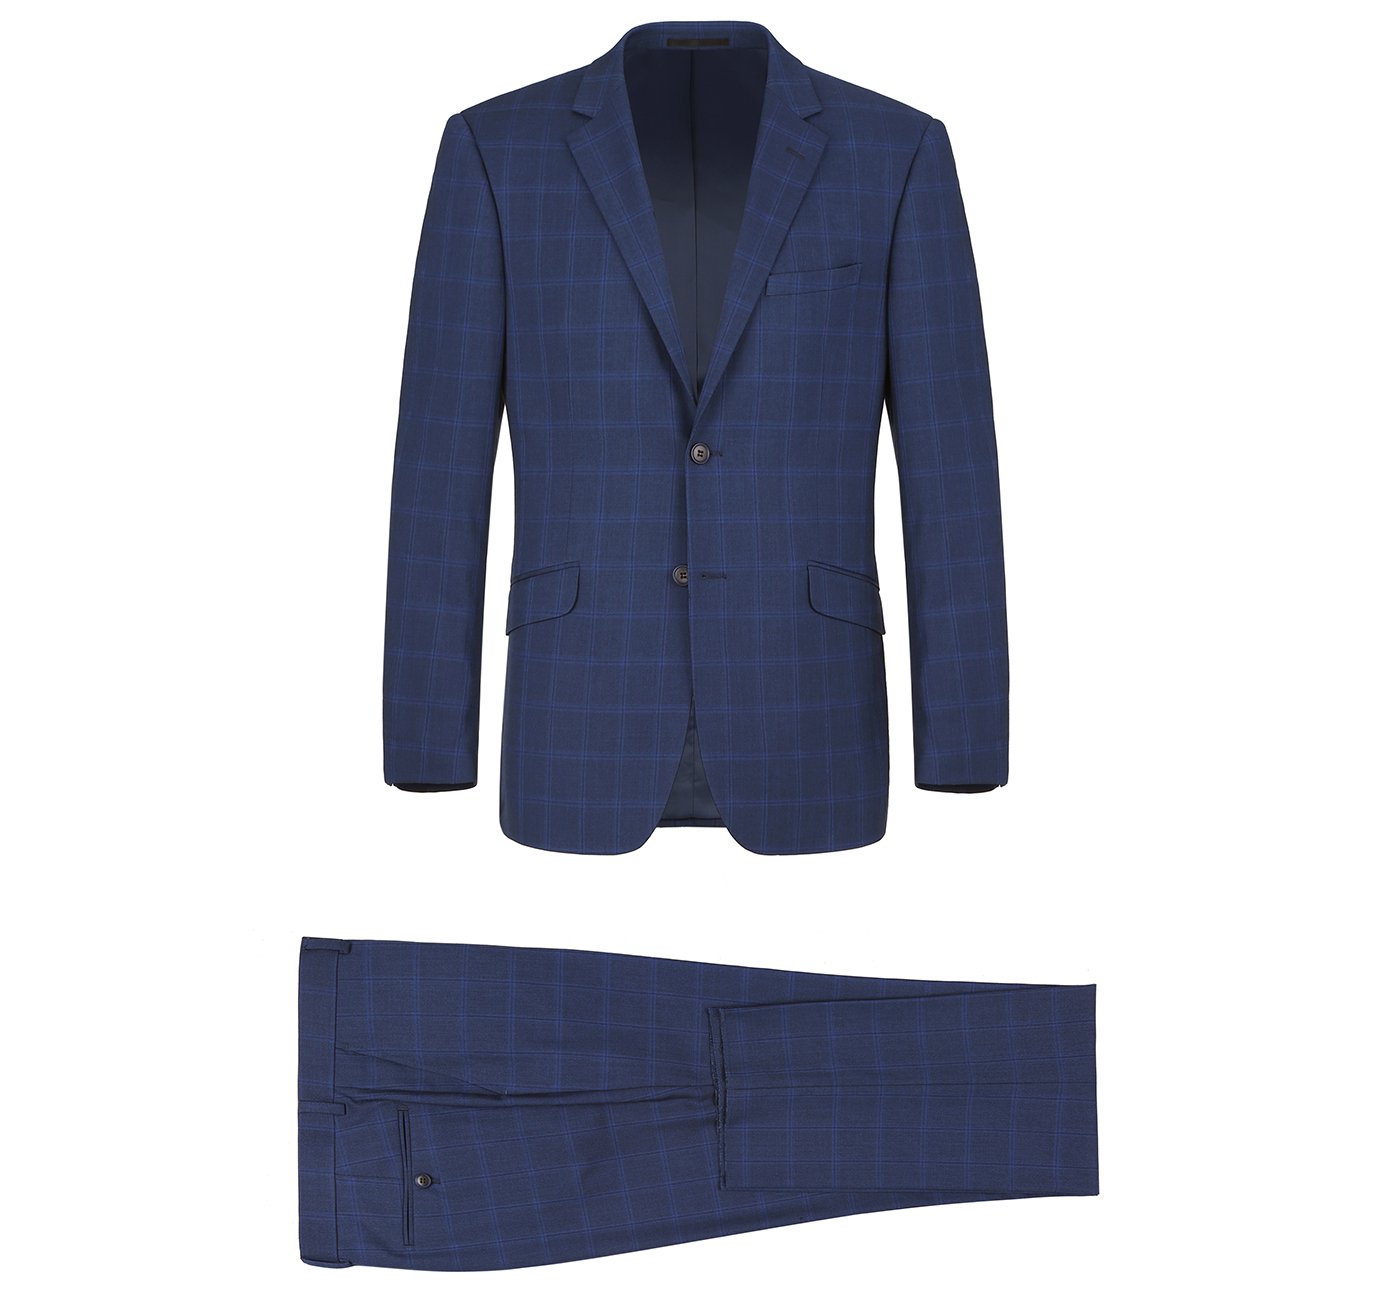 Men's Slim Fit 2-Piece Single Breasted Check Dress Suit